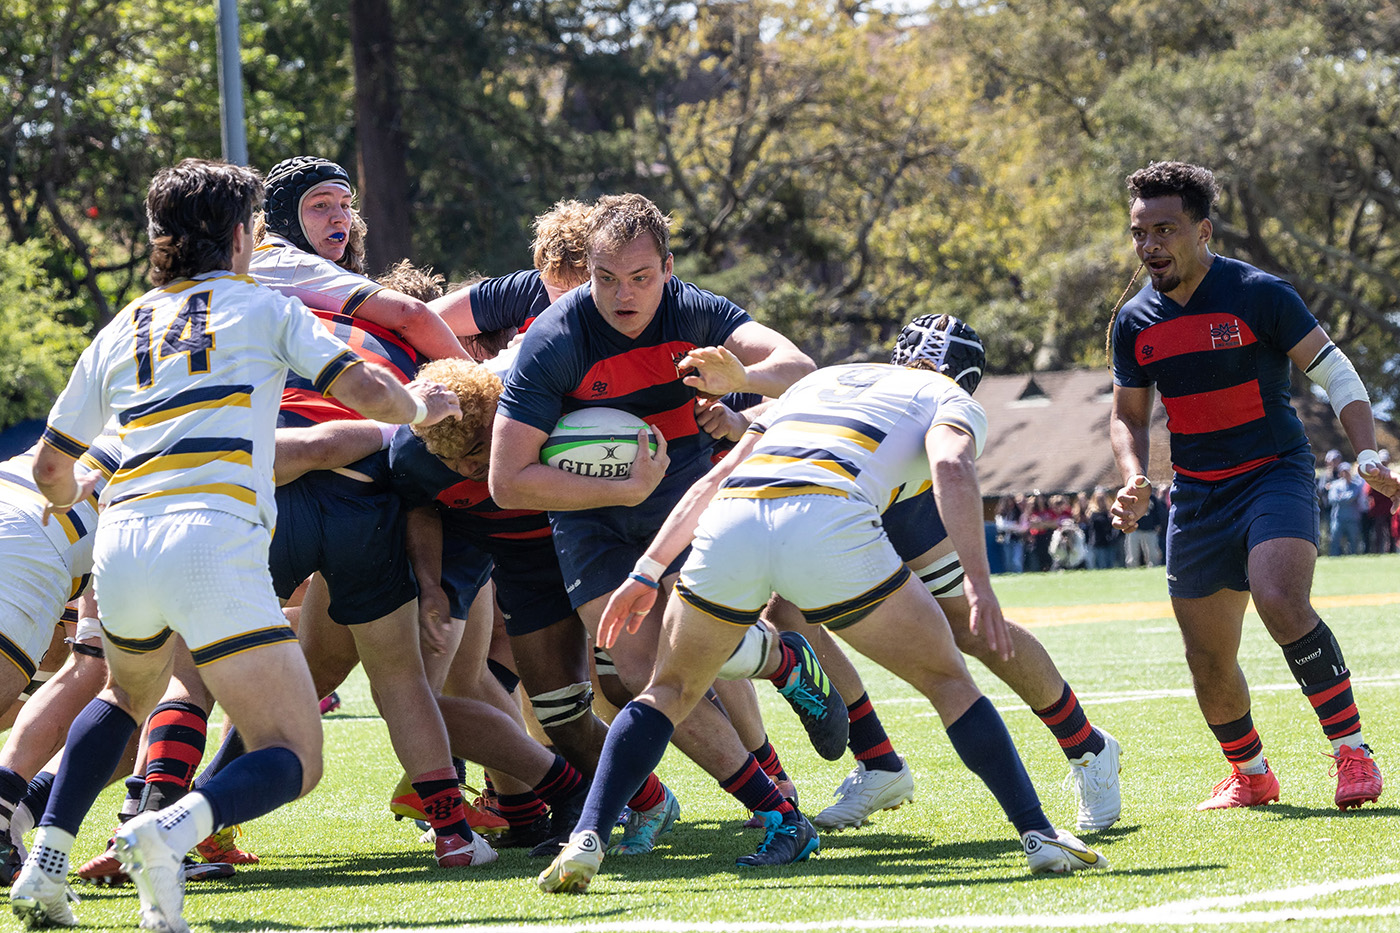 Saint Mary's rugby player Josh Allen with the ball in a scrum against UC Berkeley March 25, 2023